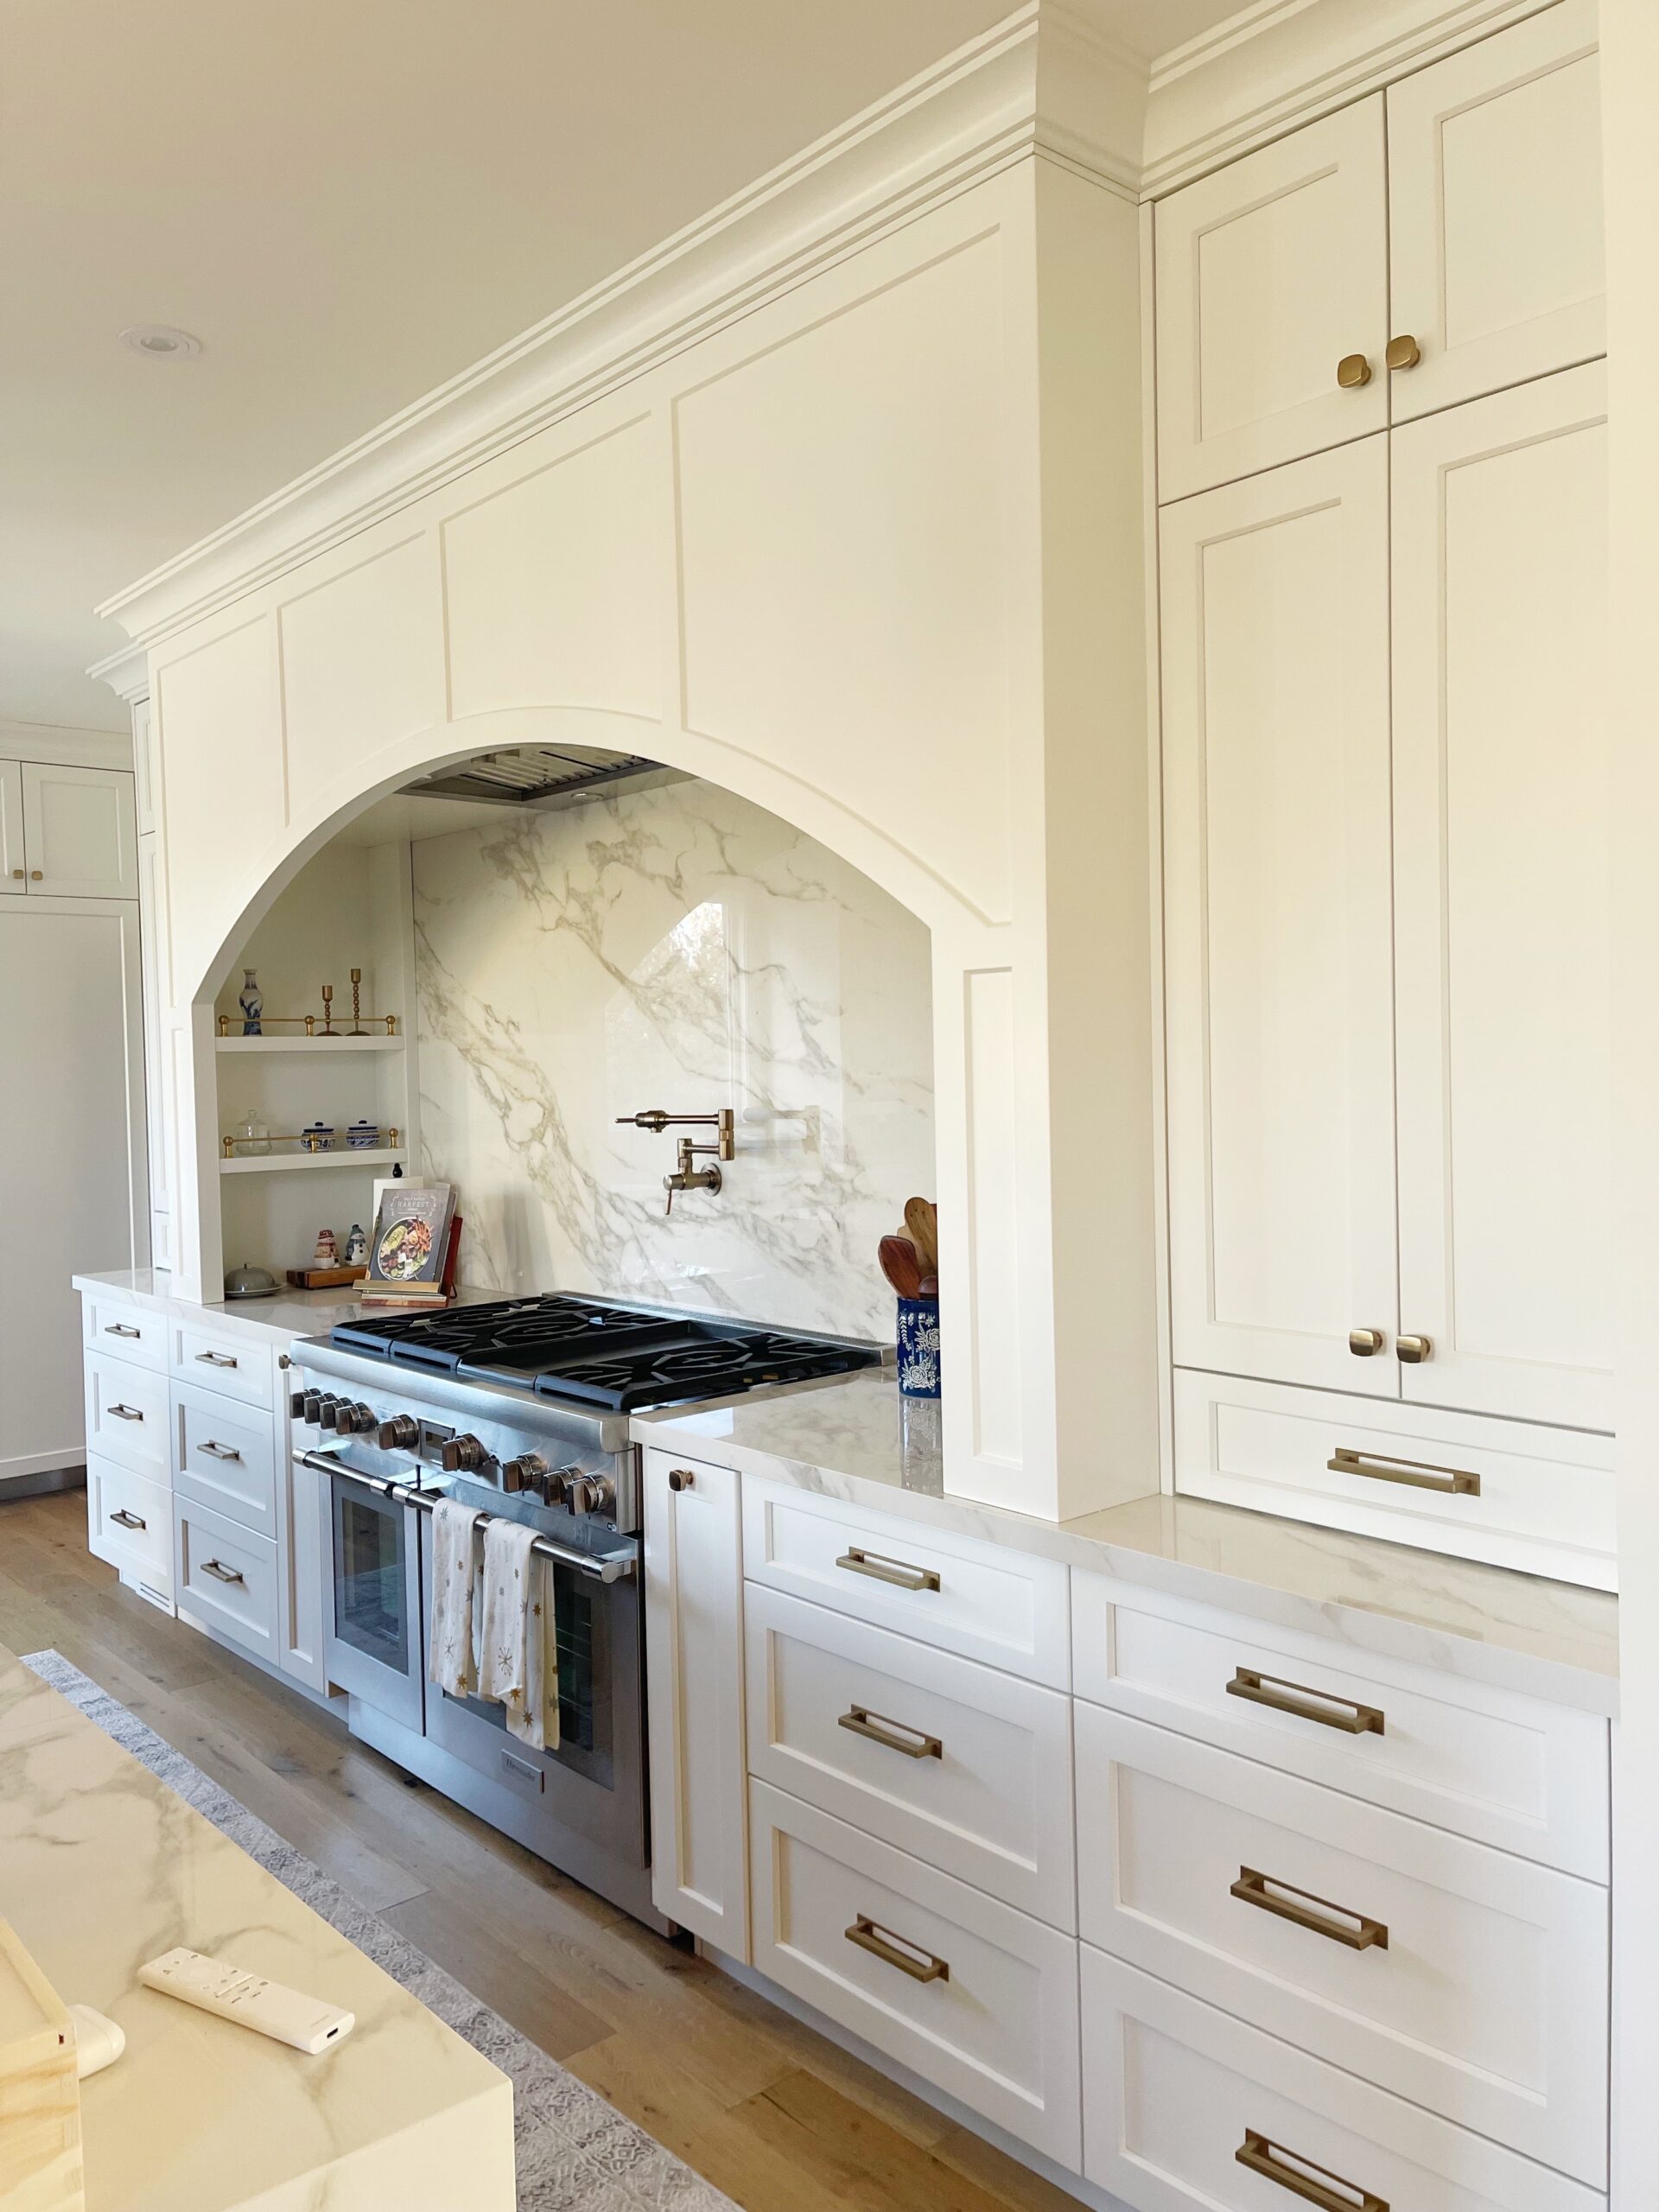 kitchen interior design showing white kitchen cabinetry and decorative range hood and gold hardware